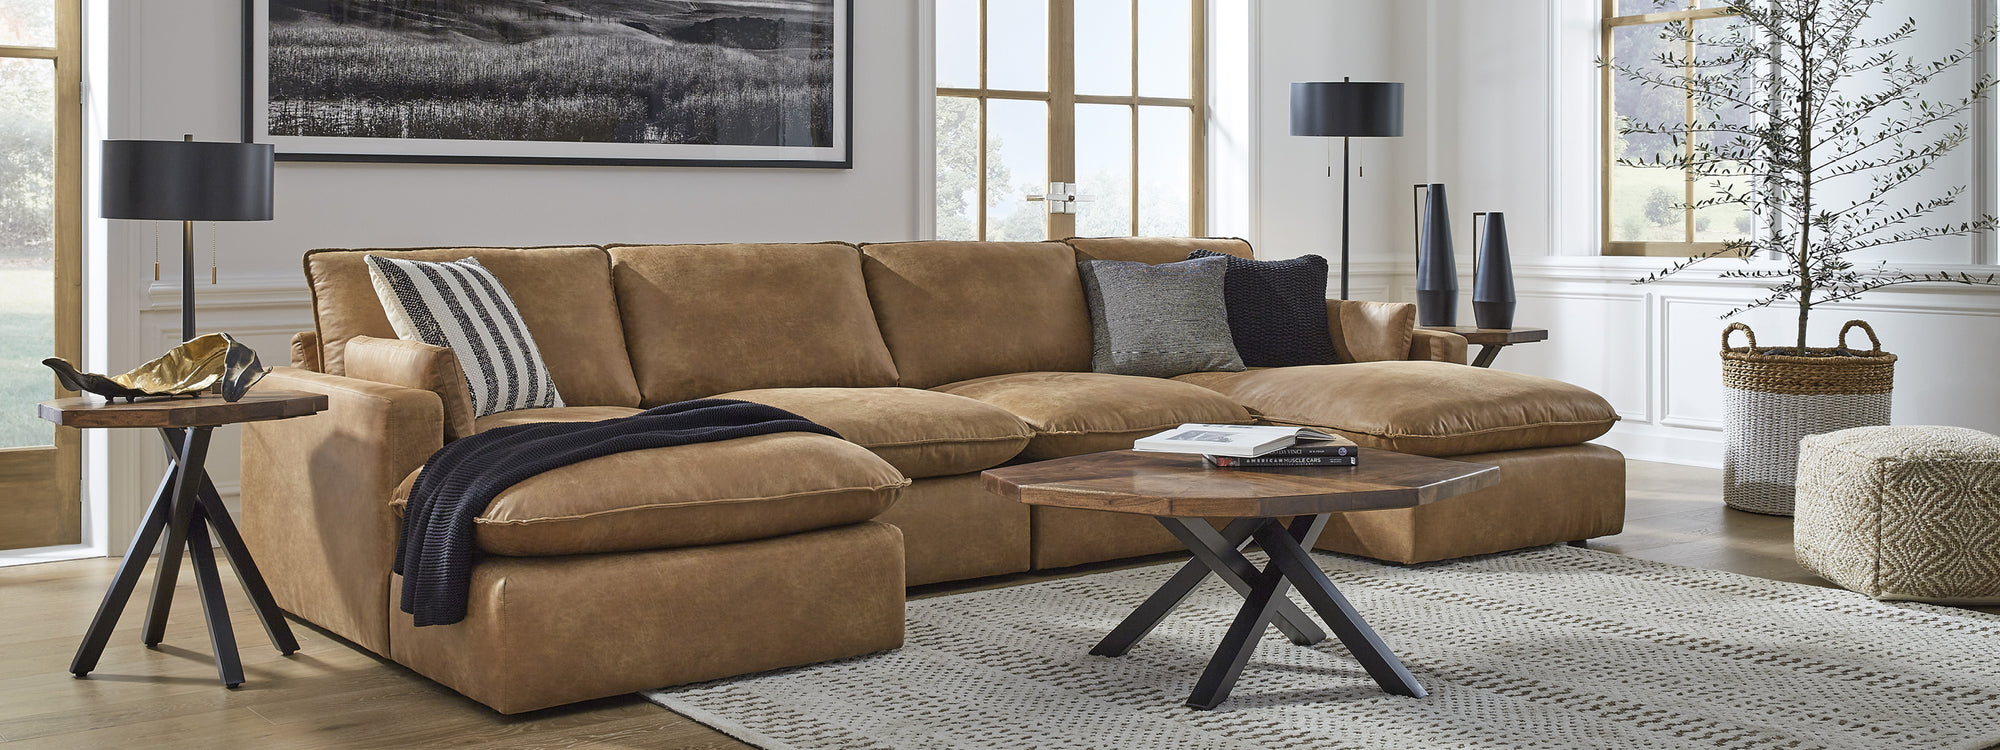 Shop for Sectional Sofas at Capital Discount Furniture in Durham, NC